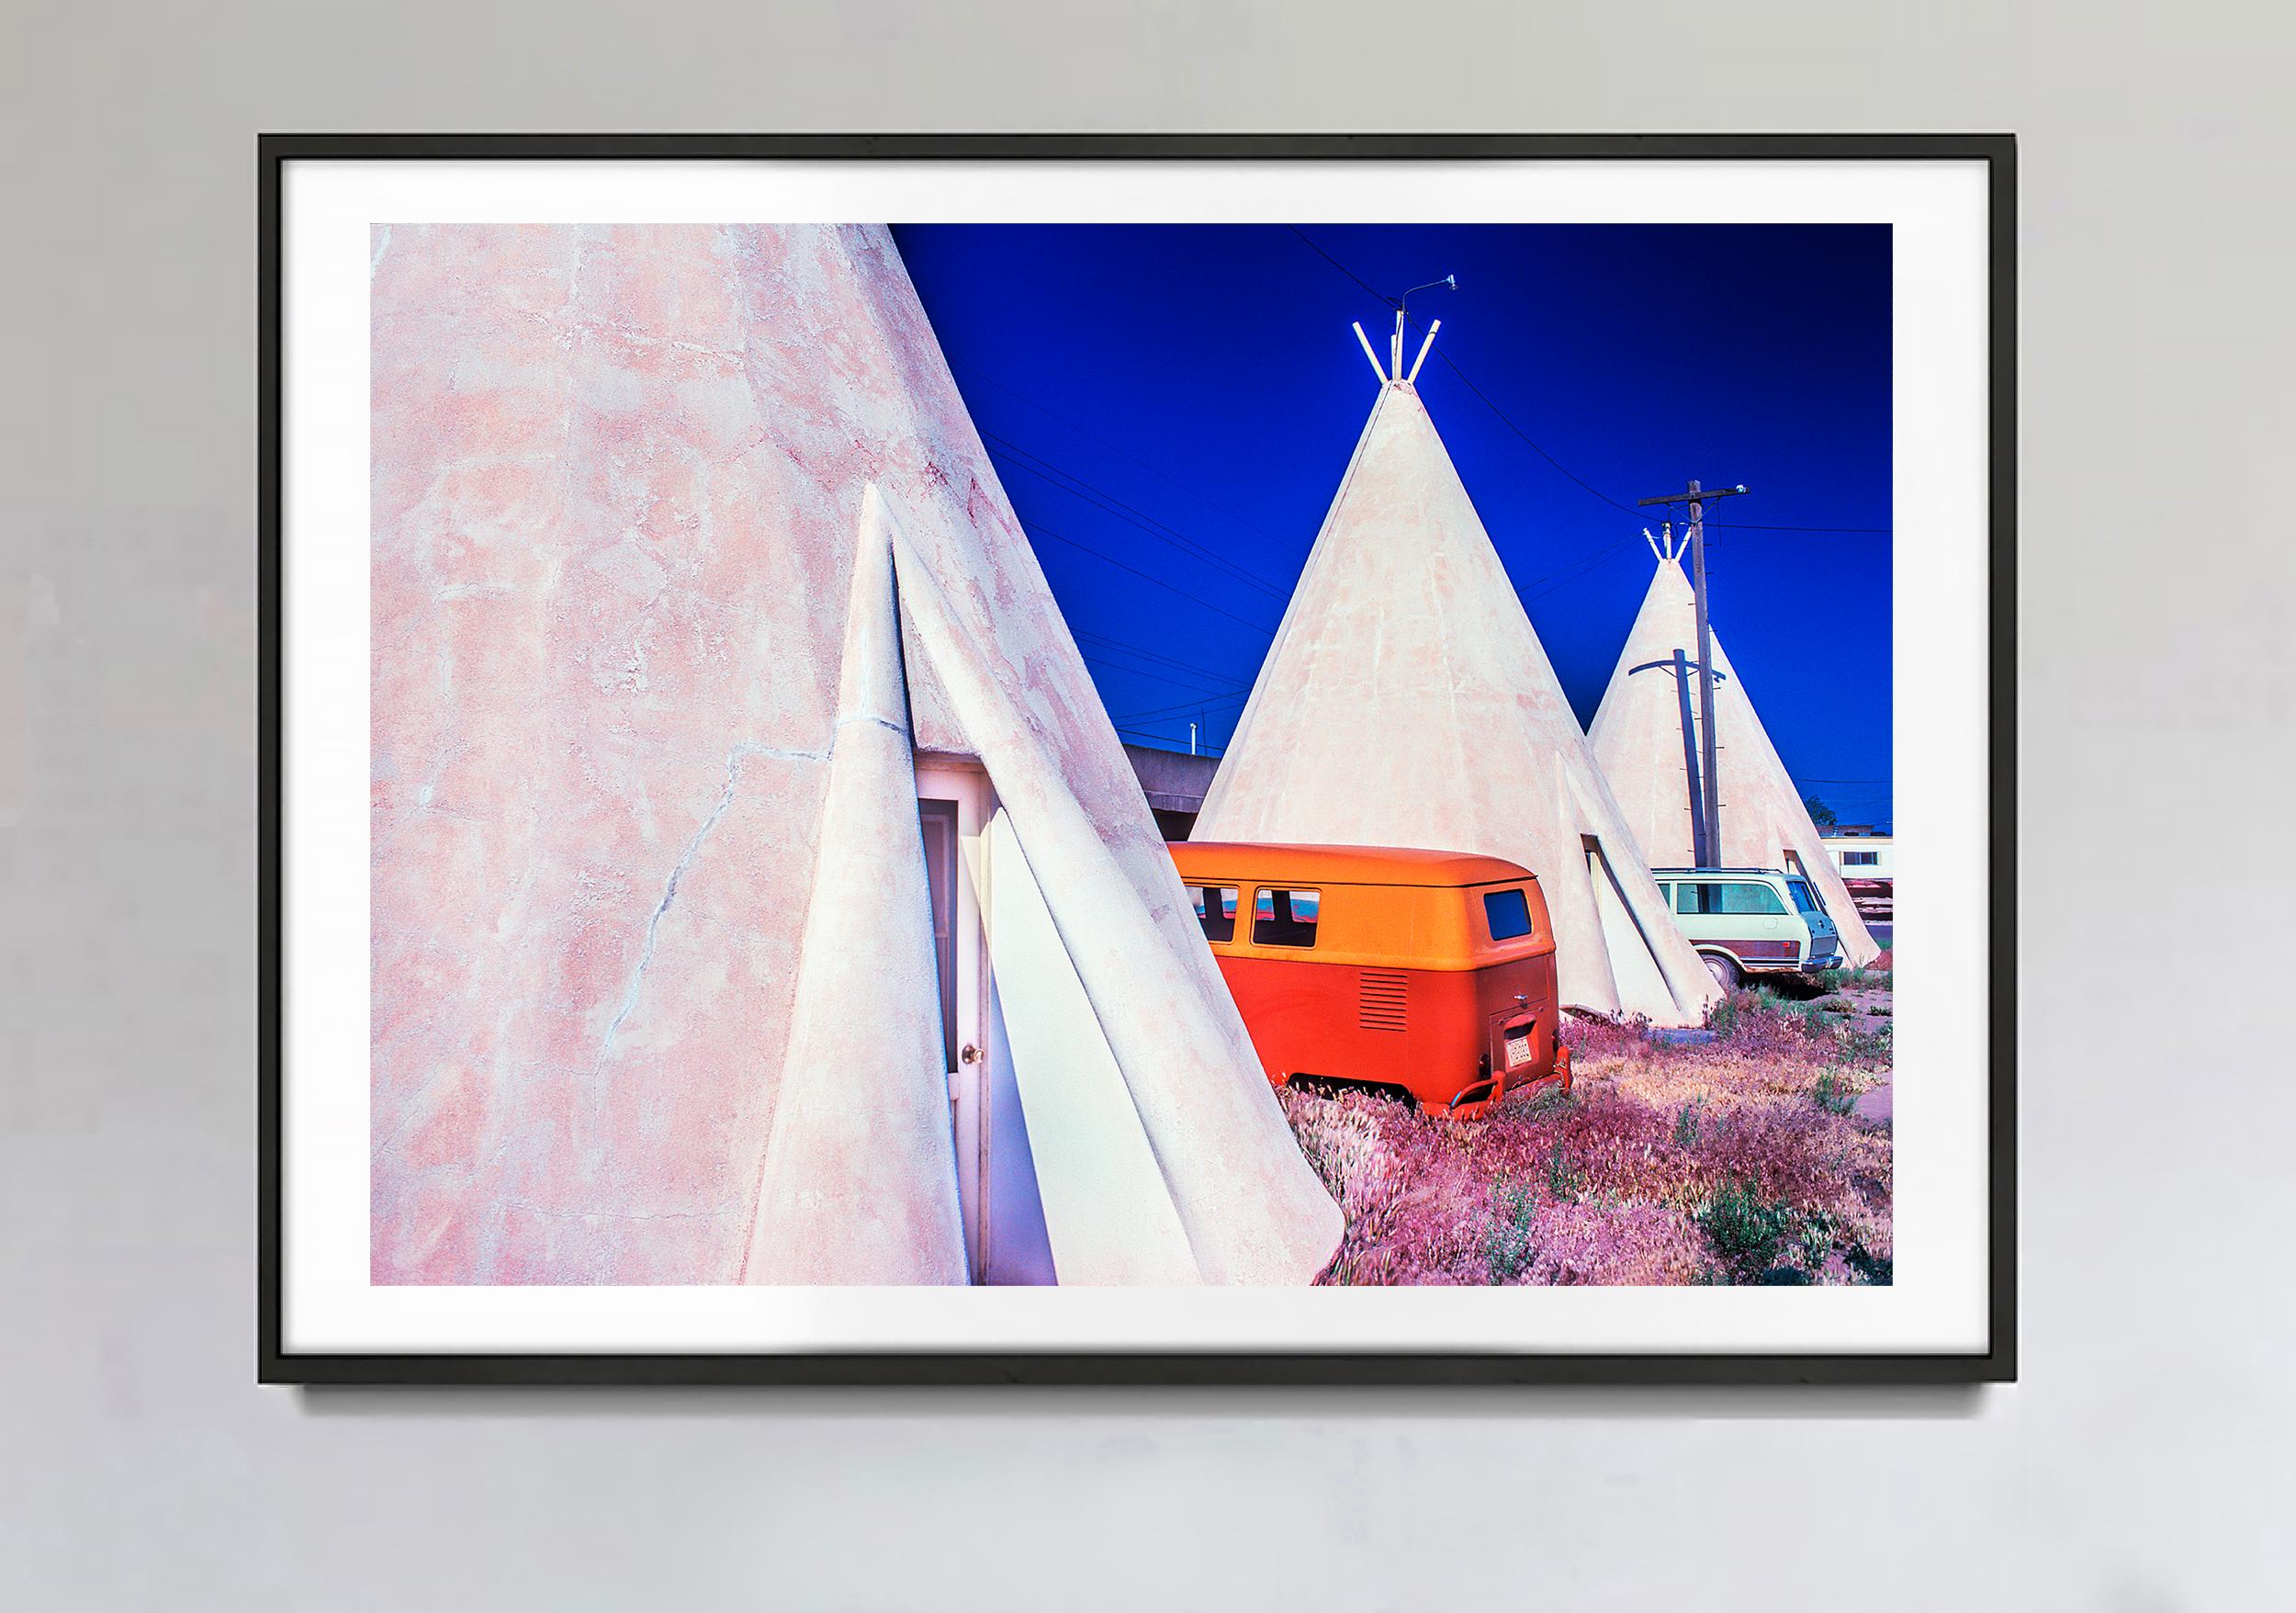 Indian Wigwam Motel In Holbrook, Arizona - Photograph by Mitchell Funk